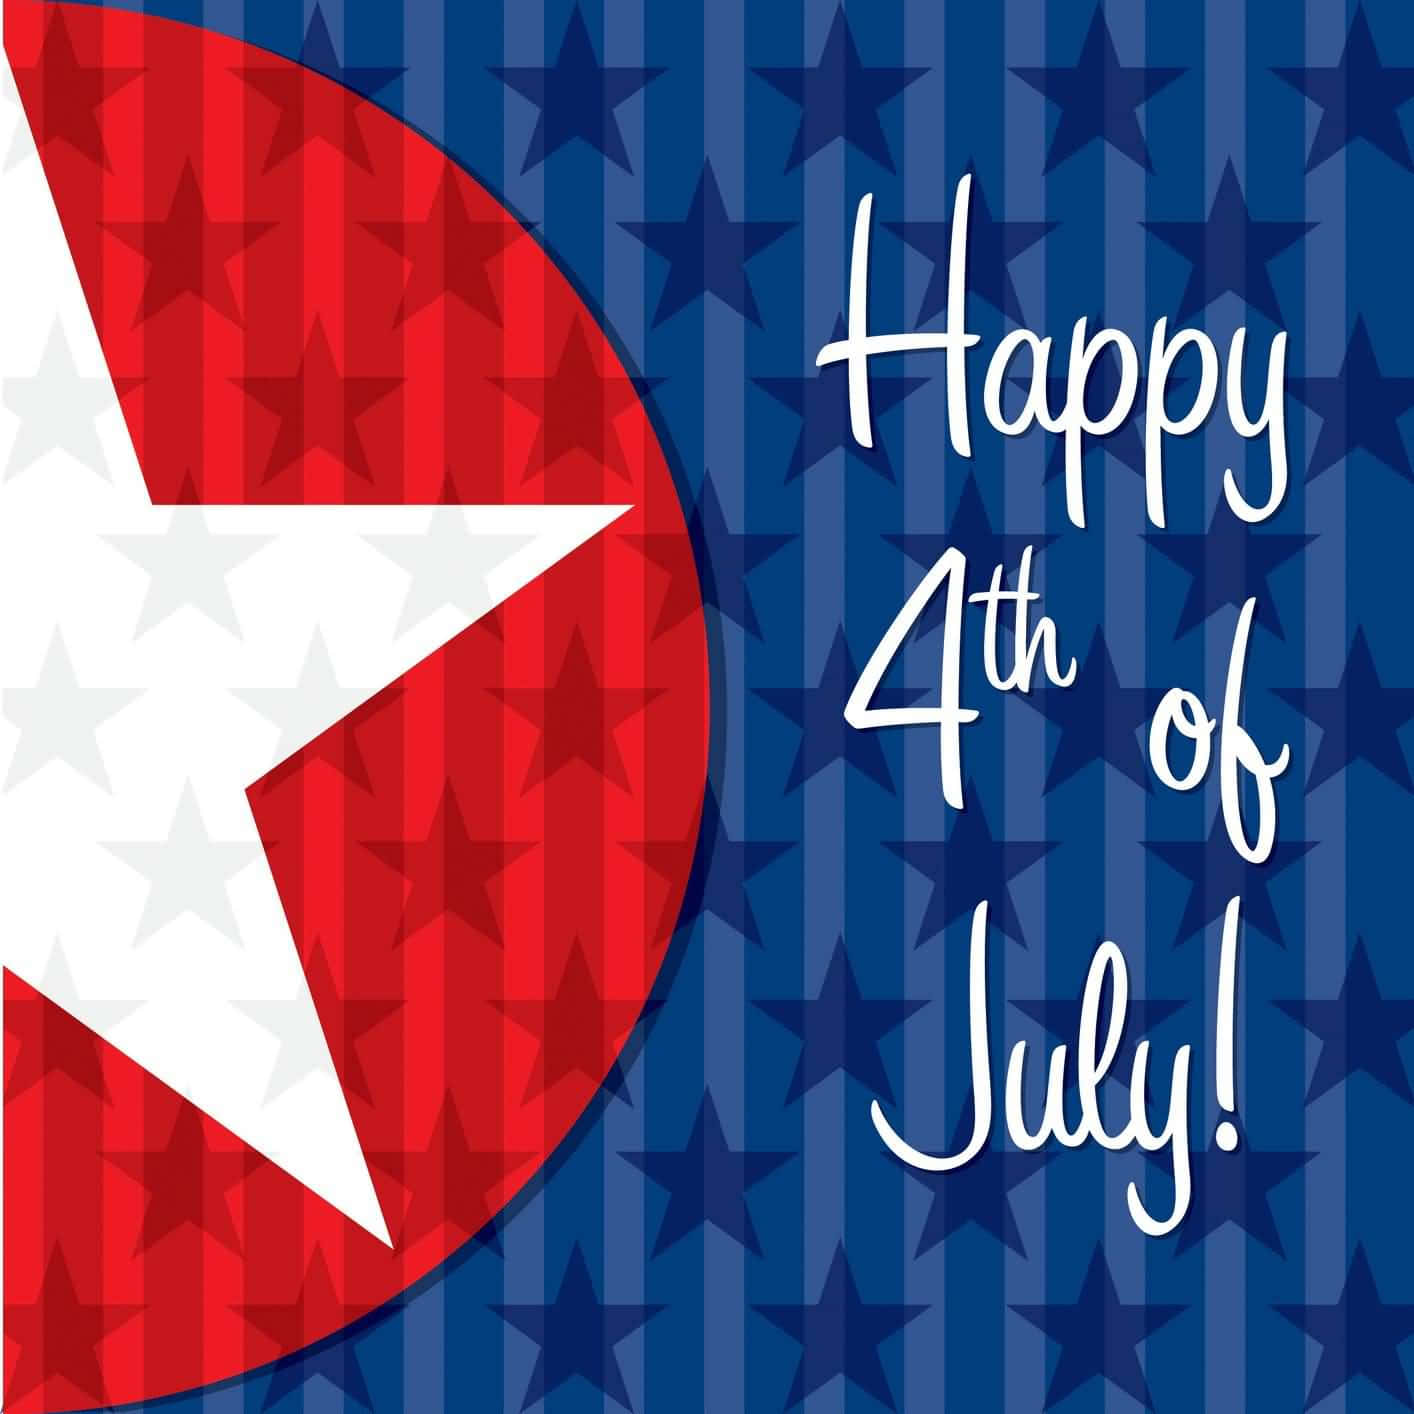 Celebrate the 4th of July with friends and family!